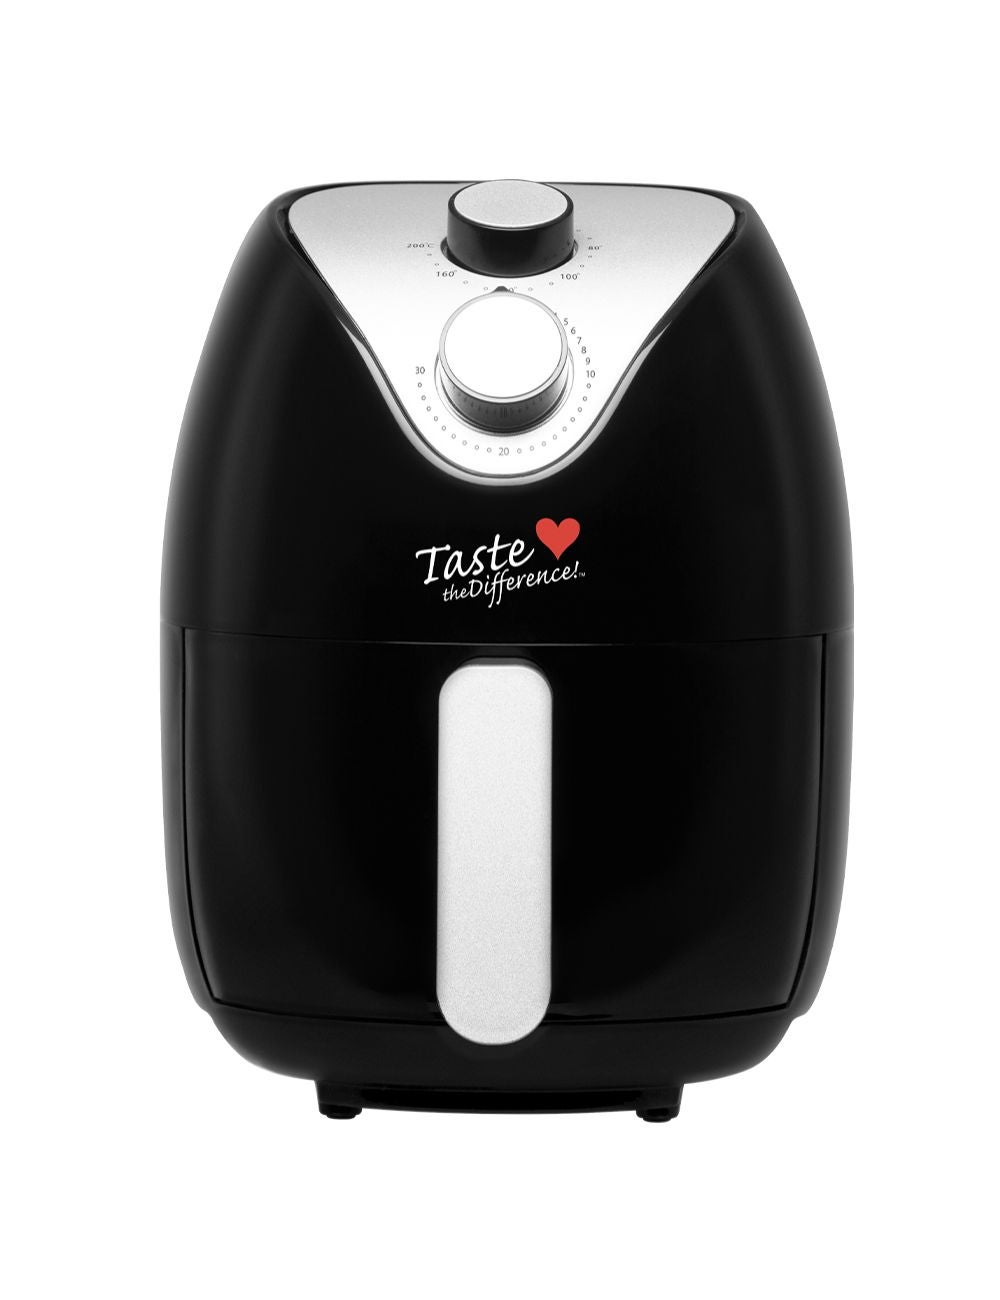 Has anyone ever used a Cecotec or knows anyone who did? : r/airfryer